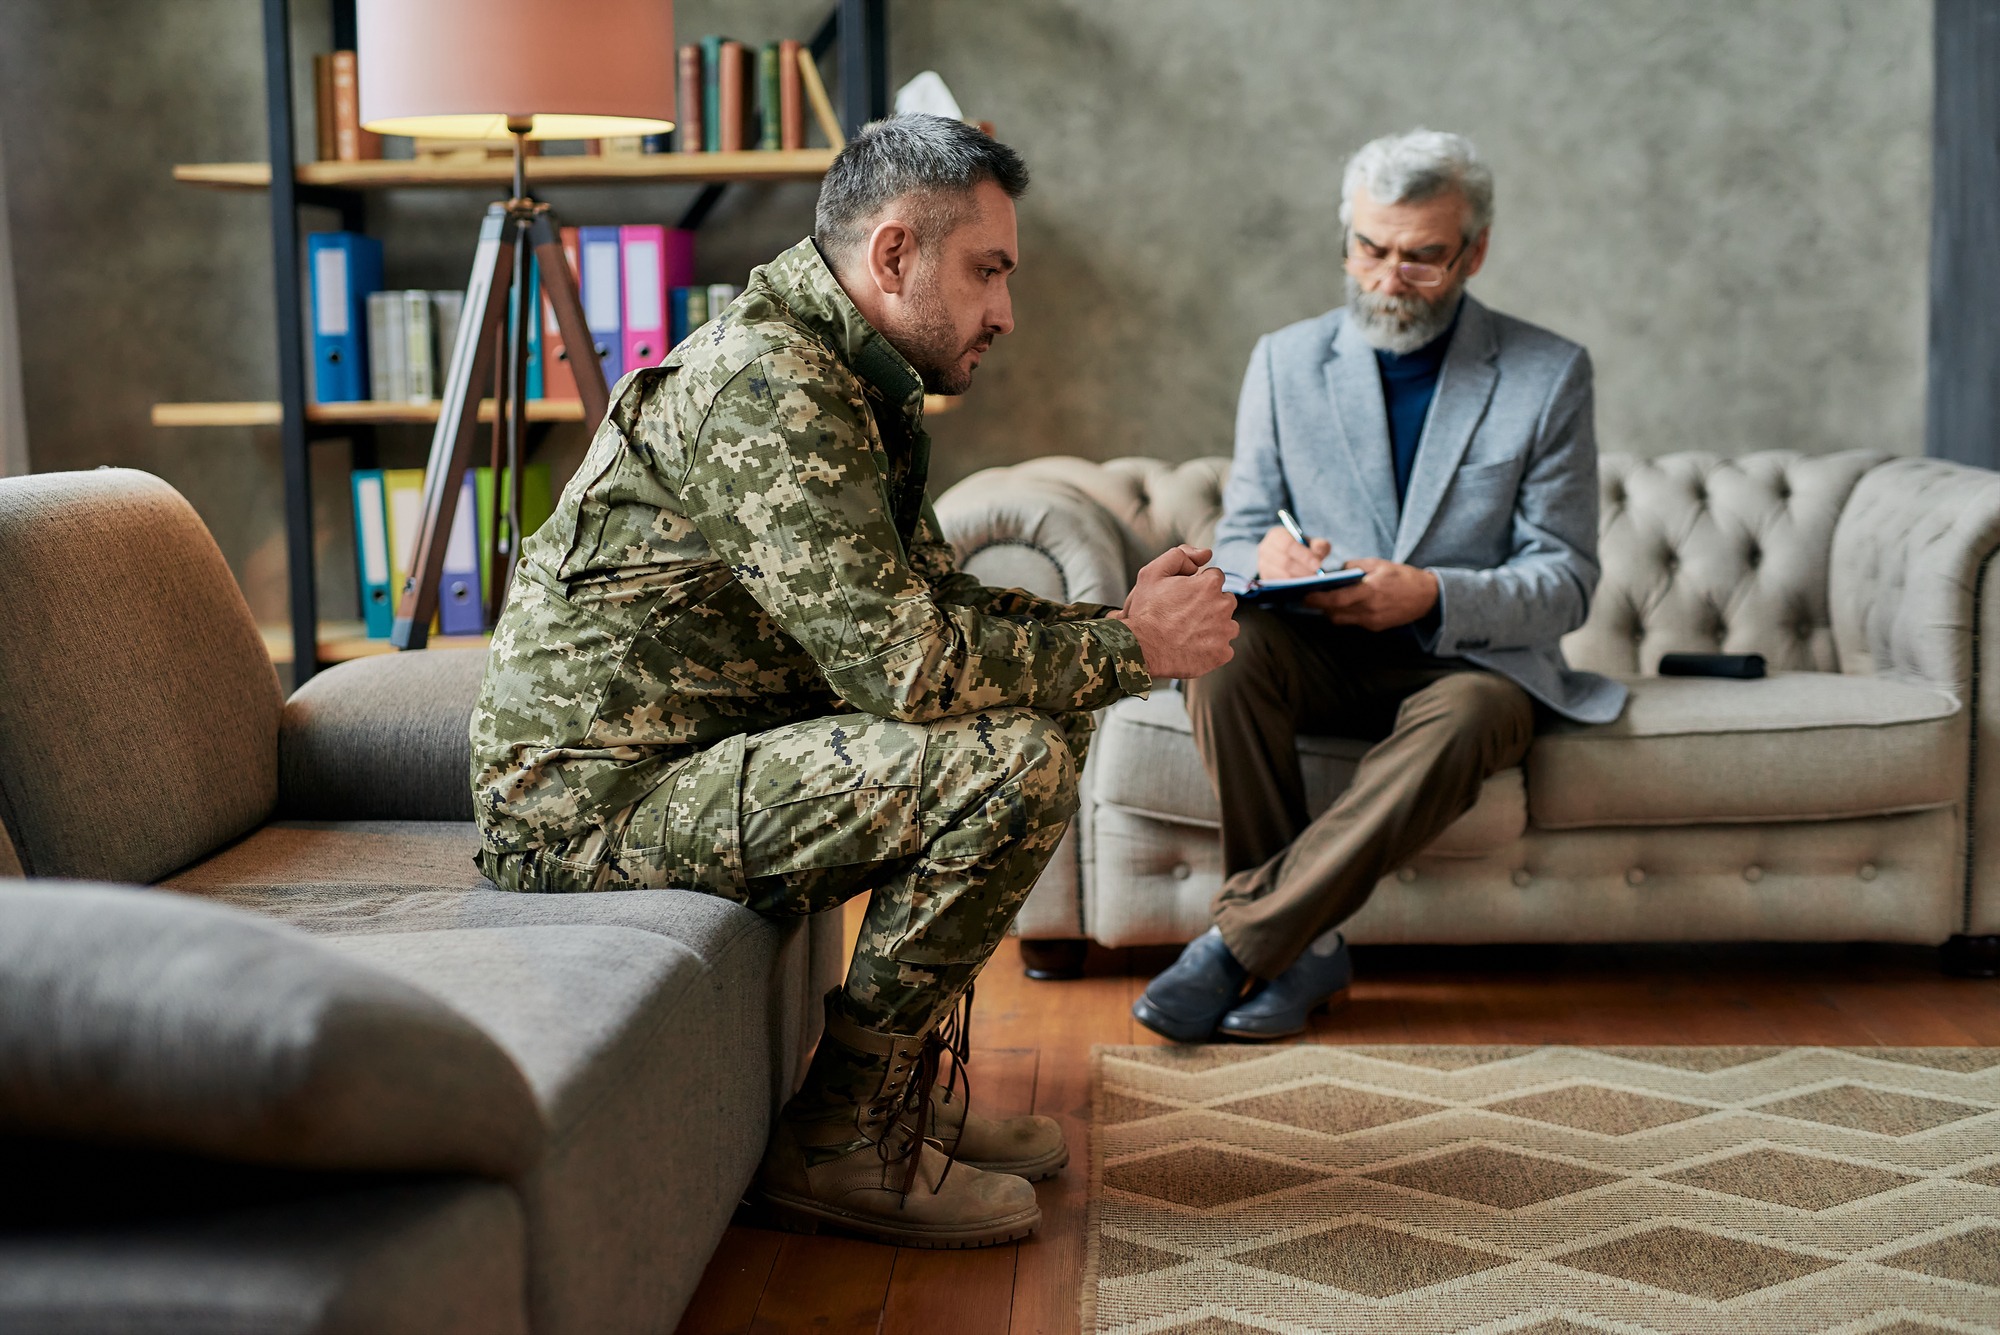 A Southern California therapist providing compassionate guidance to a veteran, highlighting the intersection of military service and the pursuit of mental health